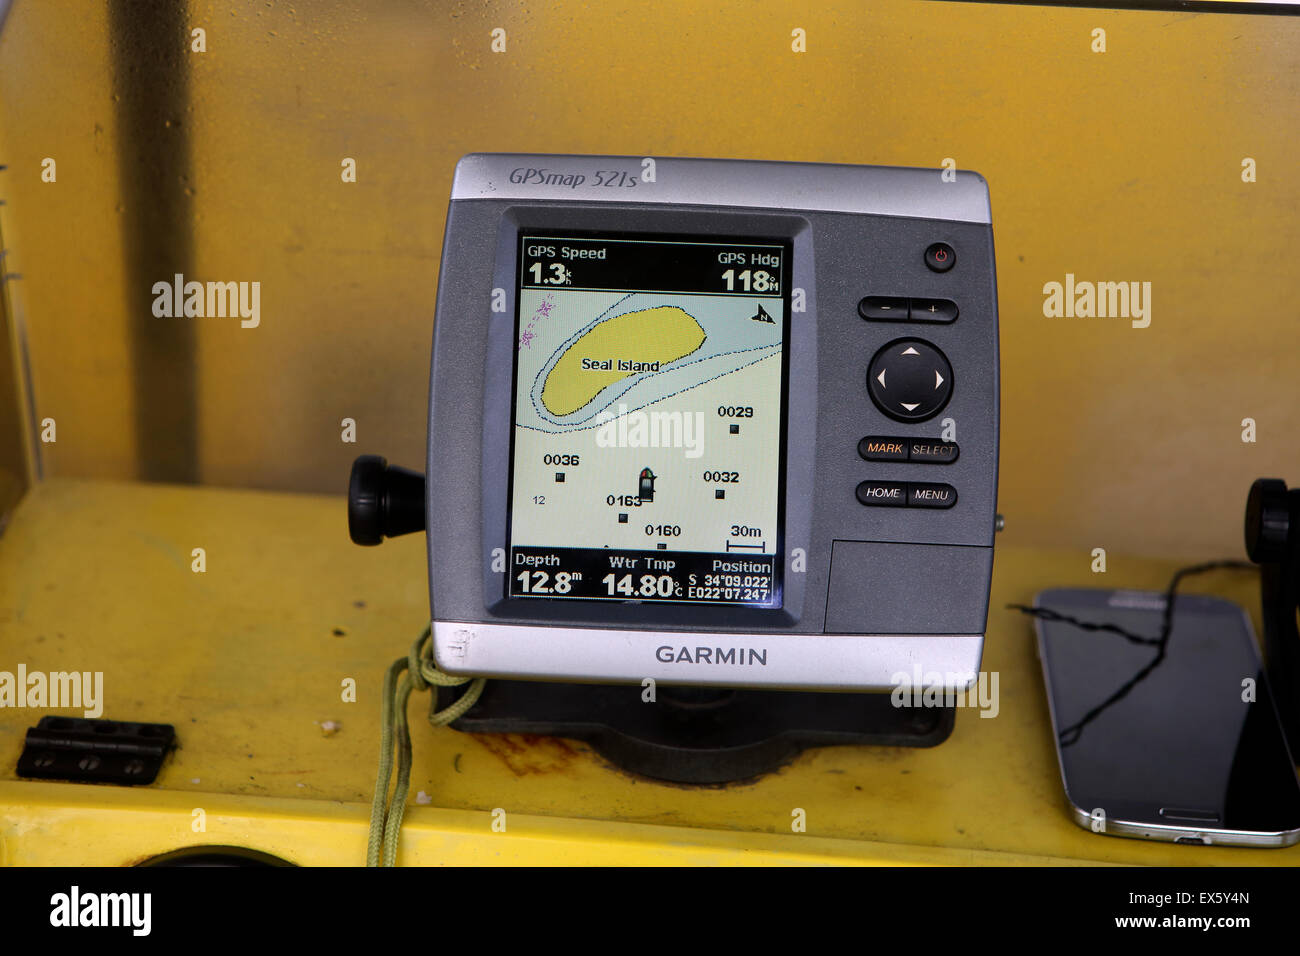 Garmin sonar fish finder and chart plotter mounted on boat Stock Photo -  Alamy